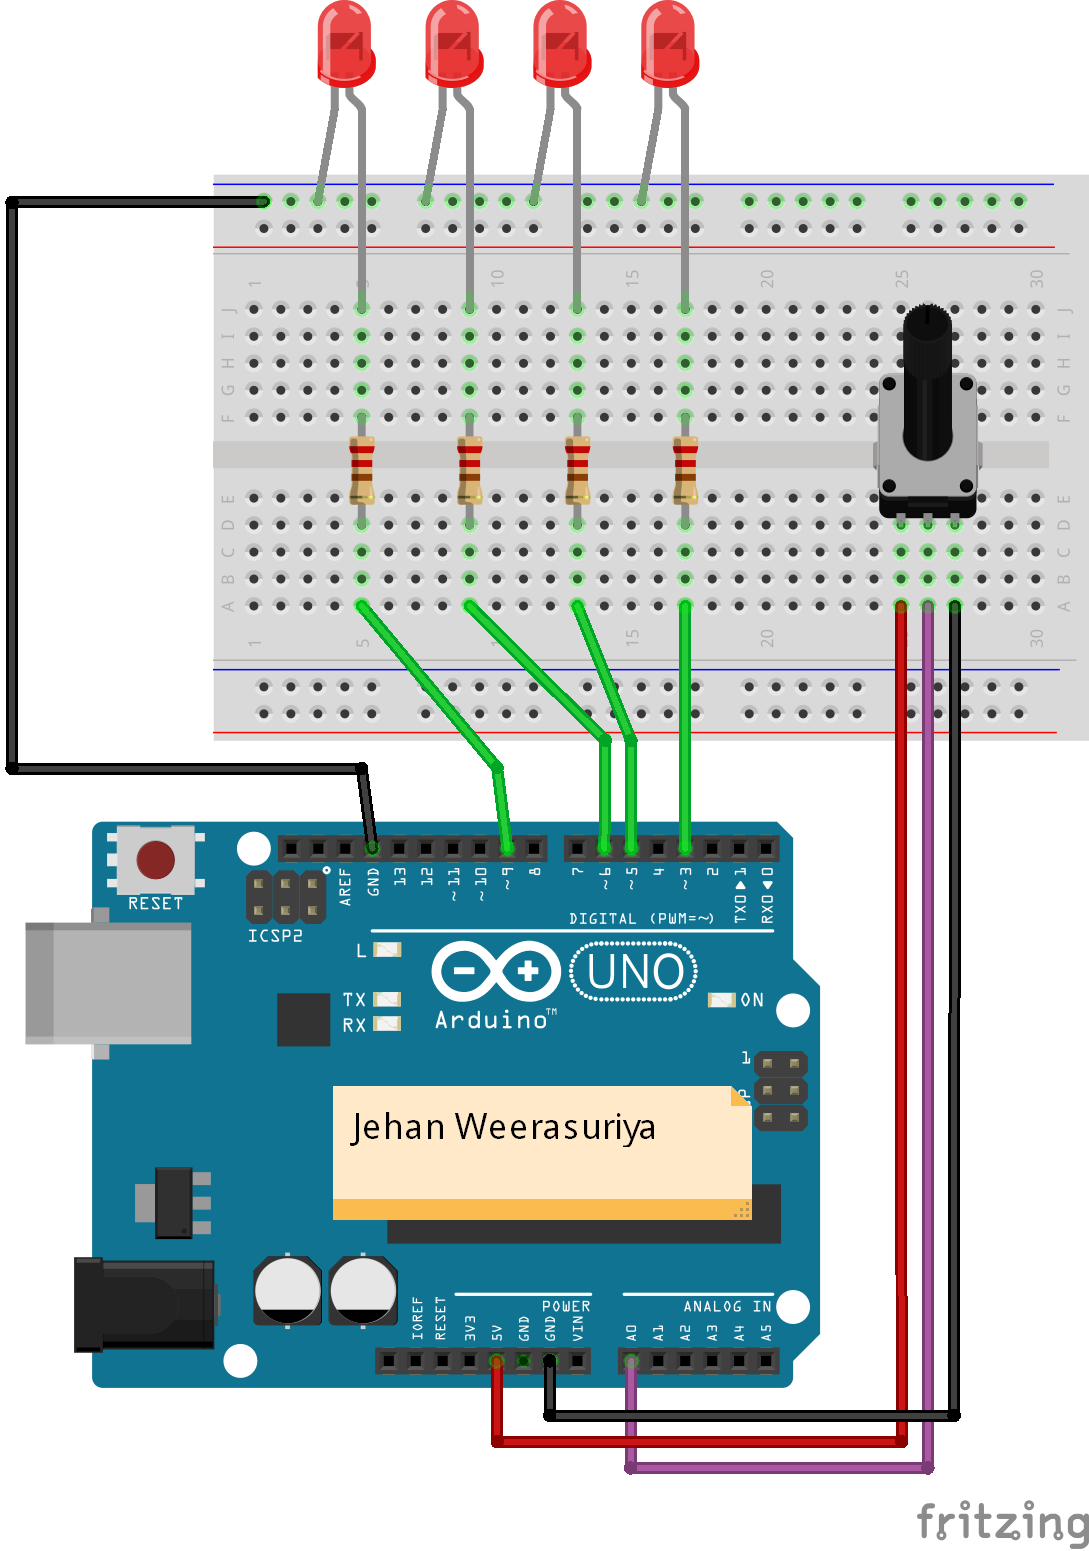 https://hackster.imgix.net/uploads/attachments/1340883/diagram_1_4_pfnSO7kKan.png